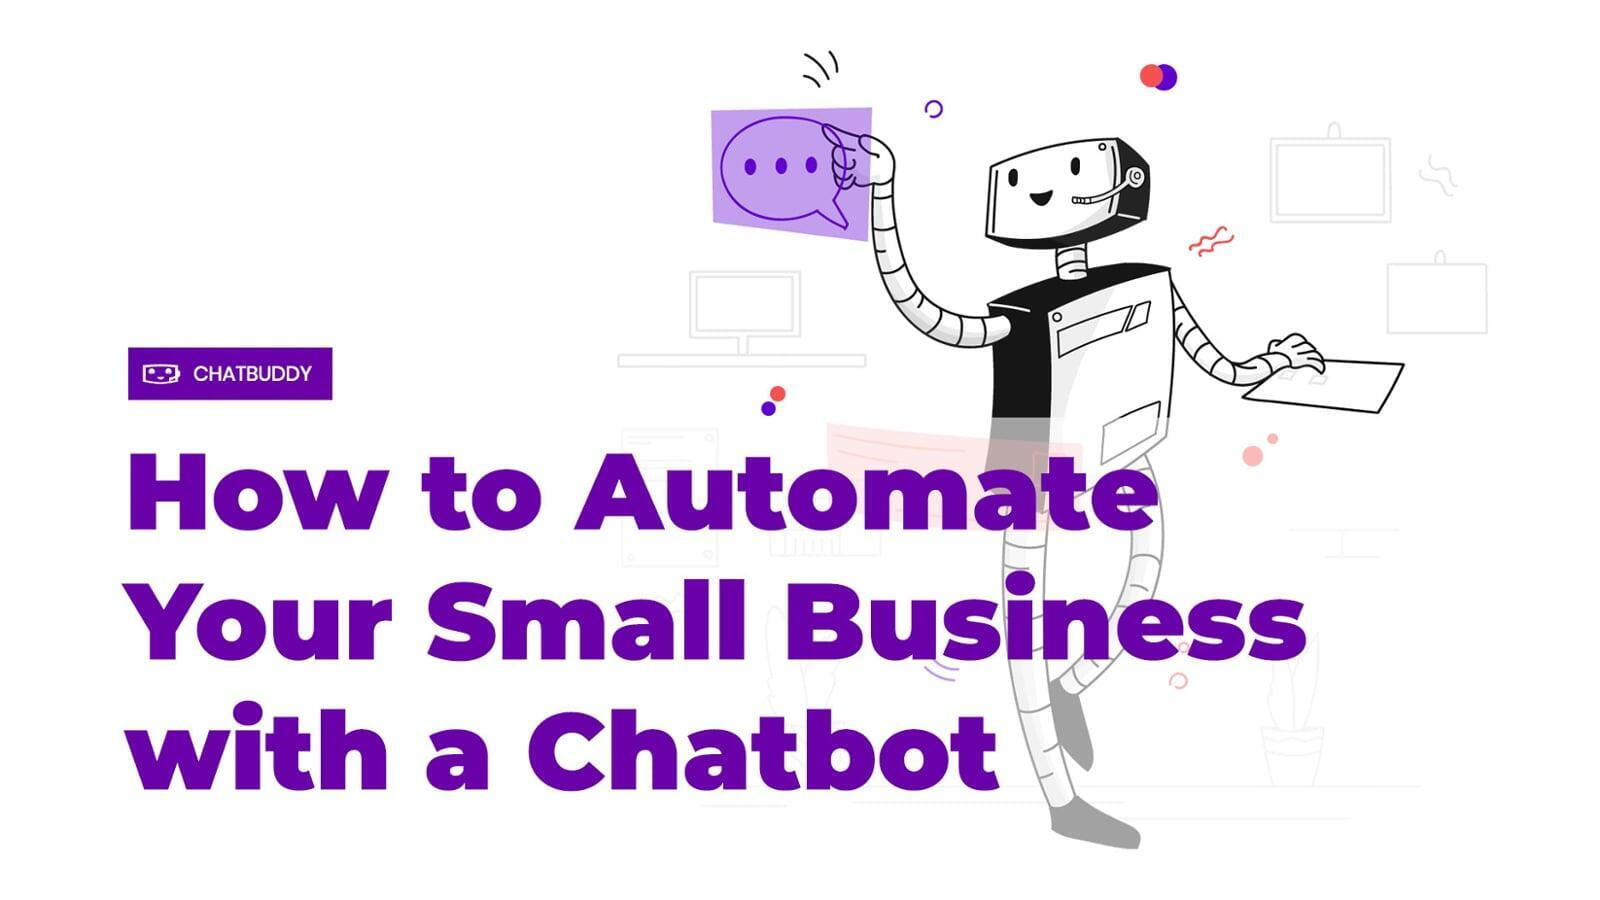 How to Automate Your Small Business with a Facebook Chatbot